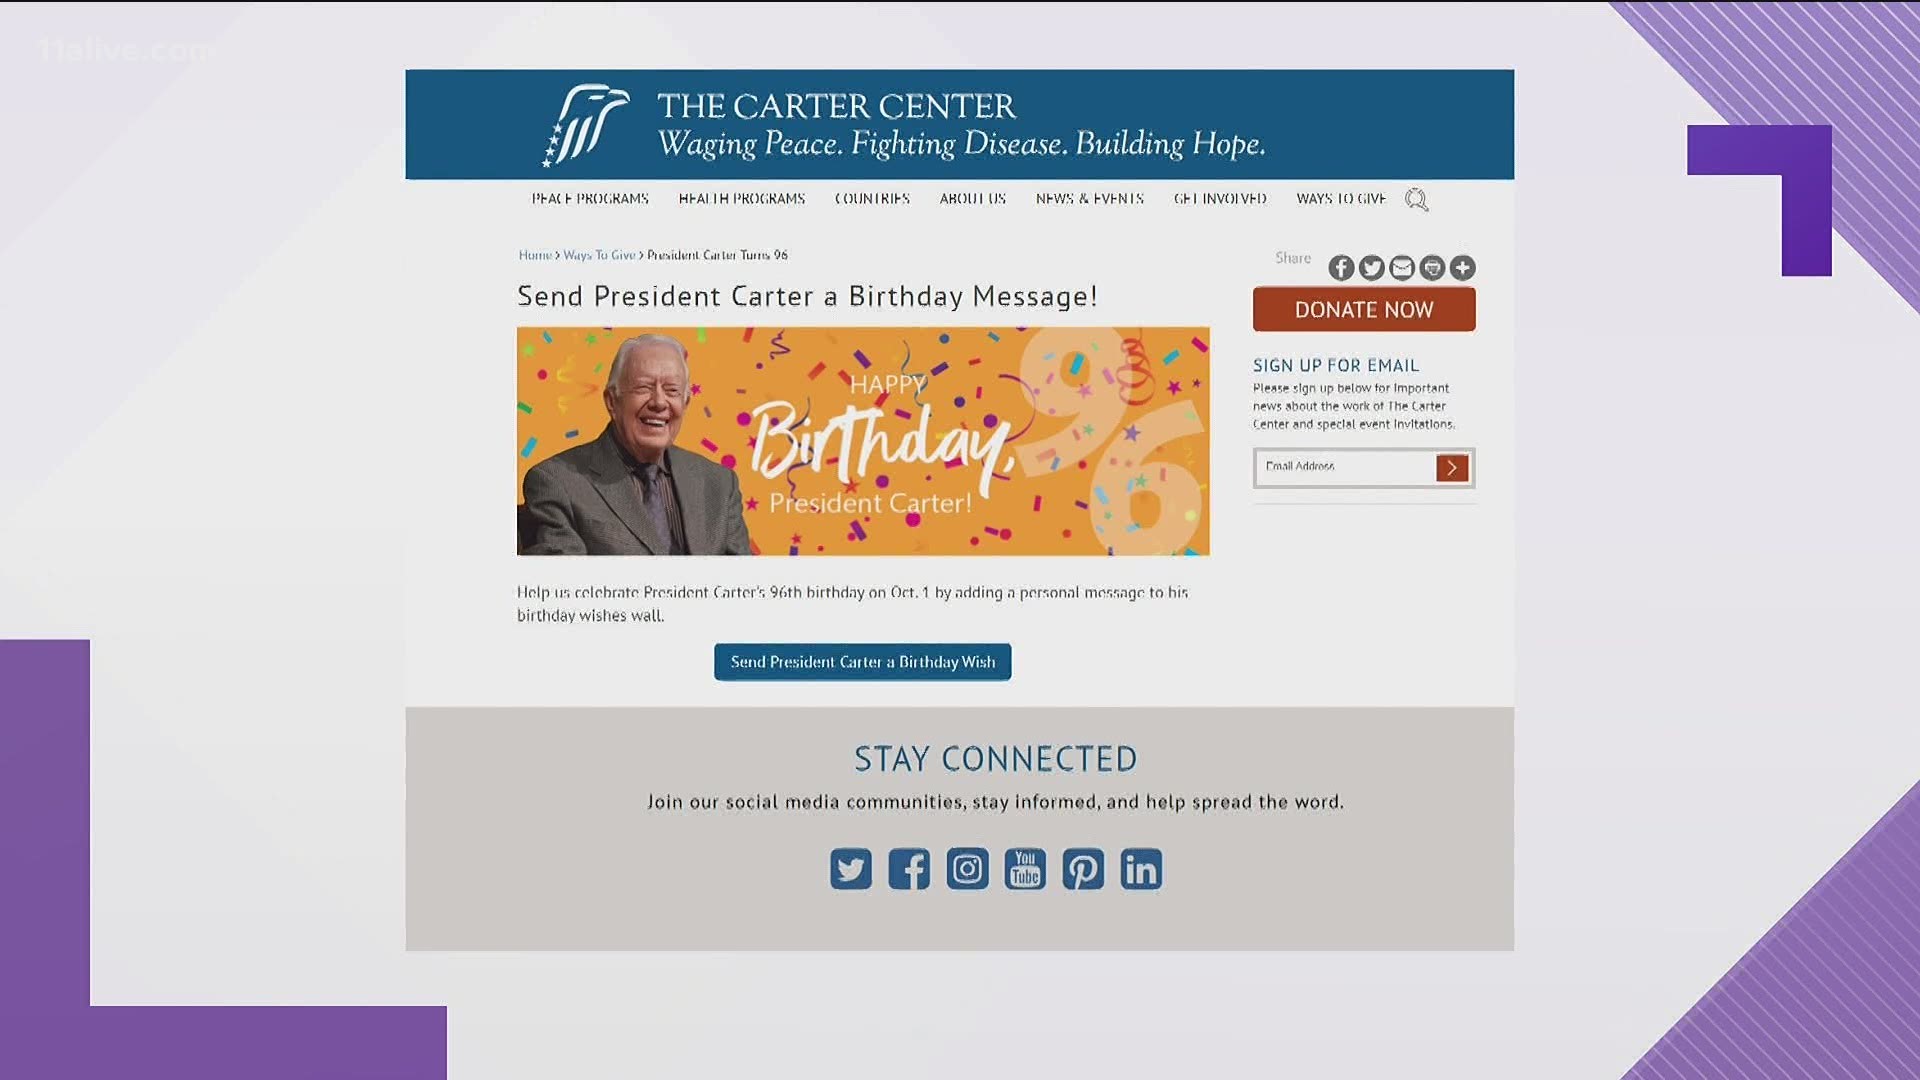 The Carter Center has created a virtual birthday wall for the former president.